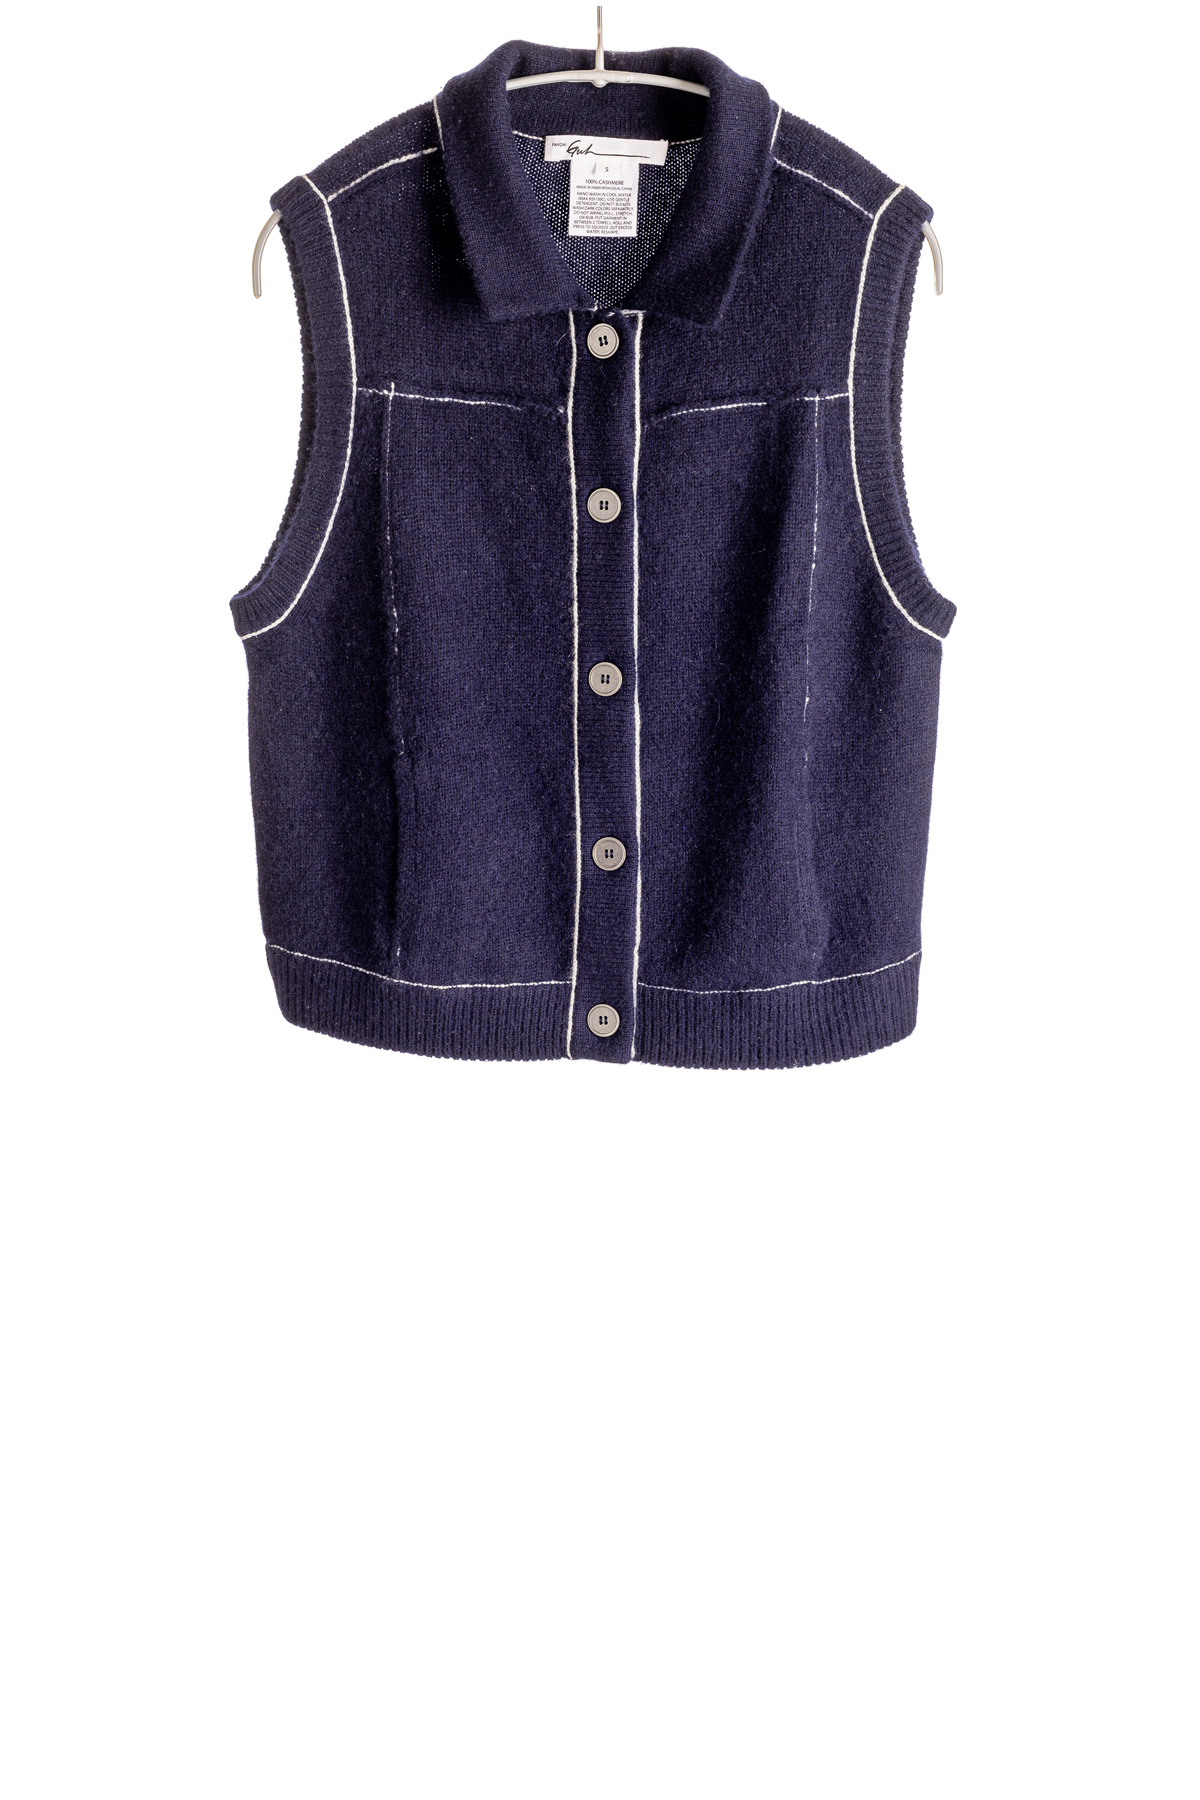 S400_JeanVest_Navy_H1Front